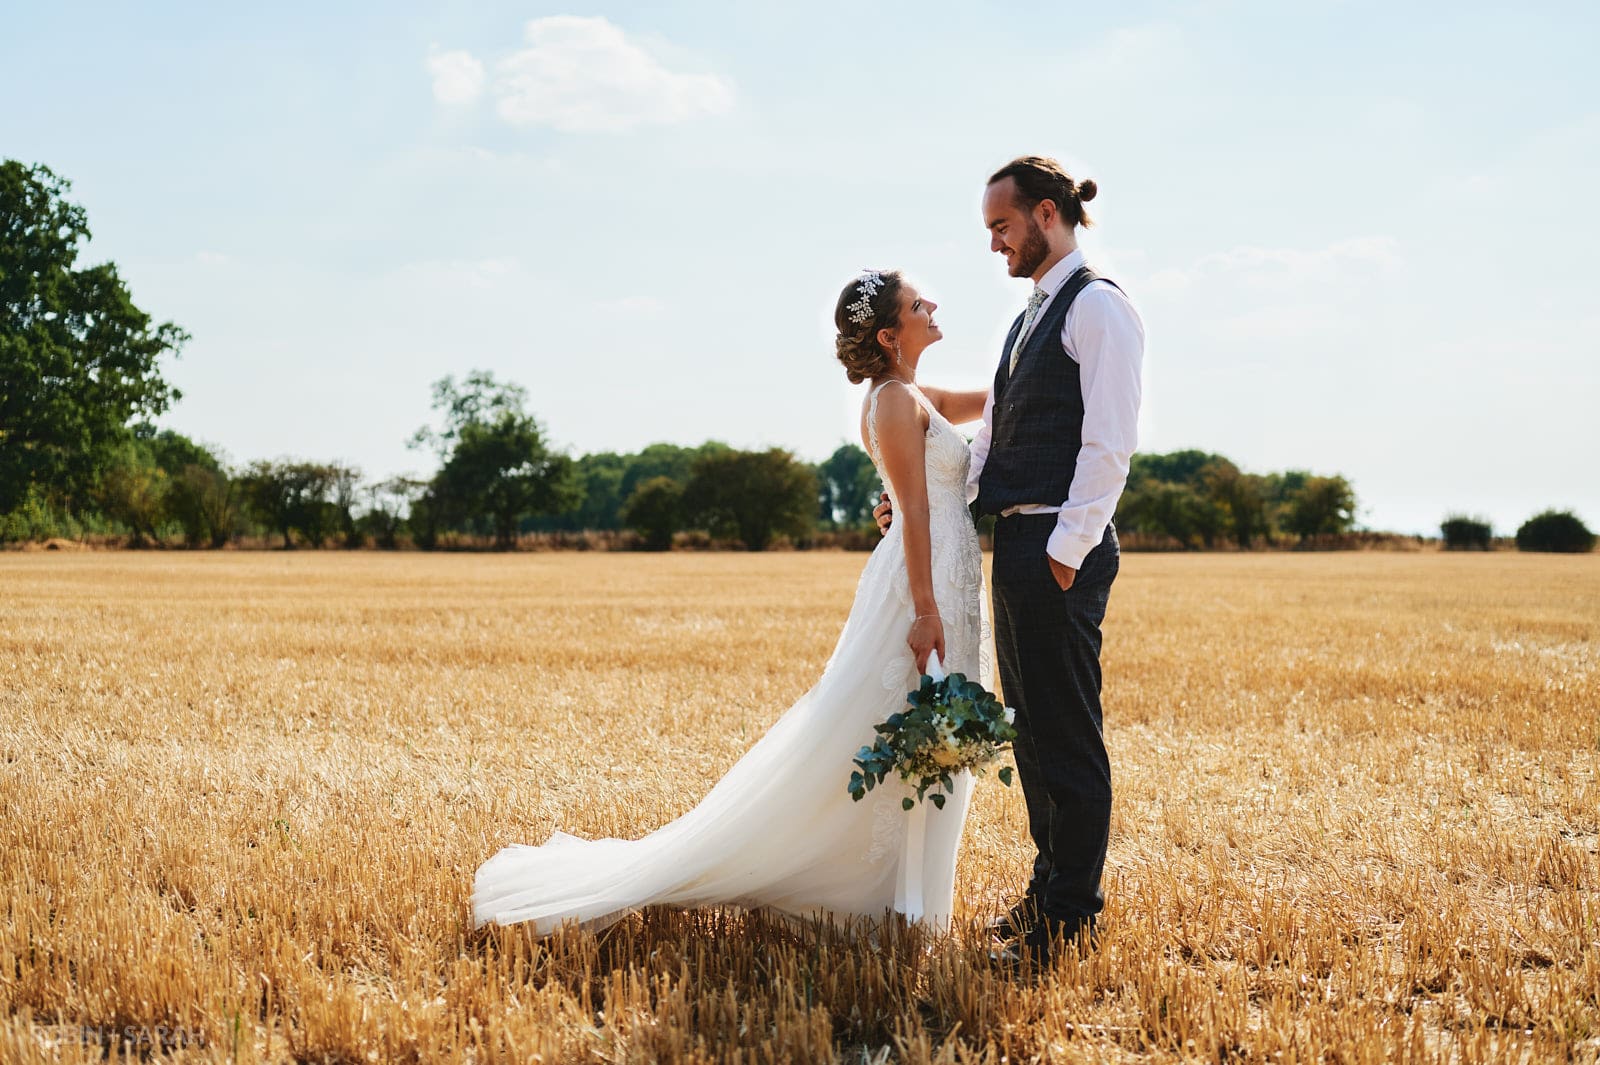 Bride and groom relax in crop field on a bright sunny day